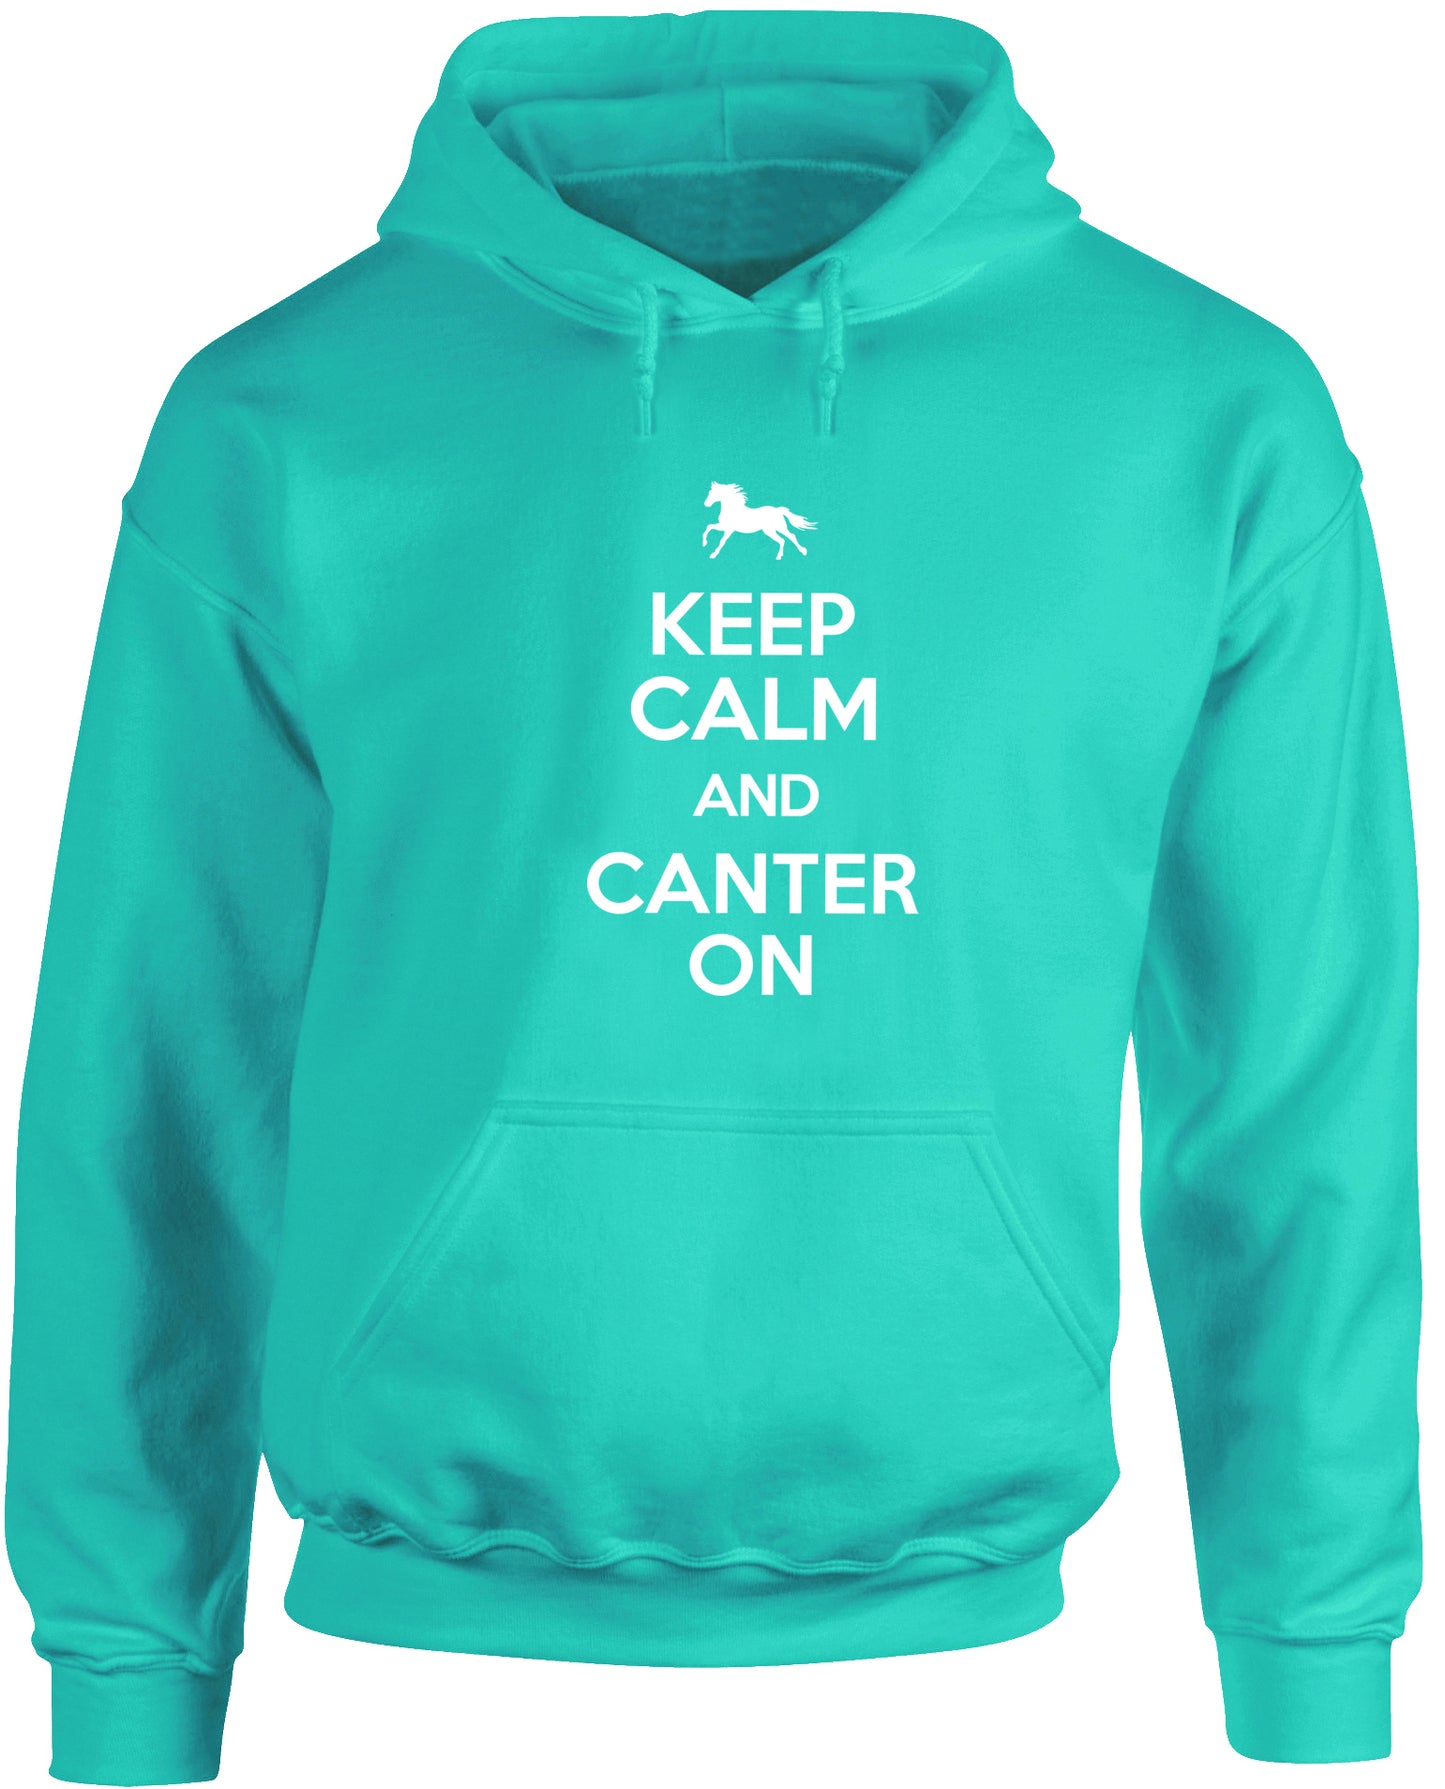 Keep Calm and Canter On Horse Riding unisex Hoodie hooded top